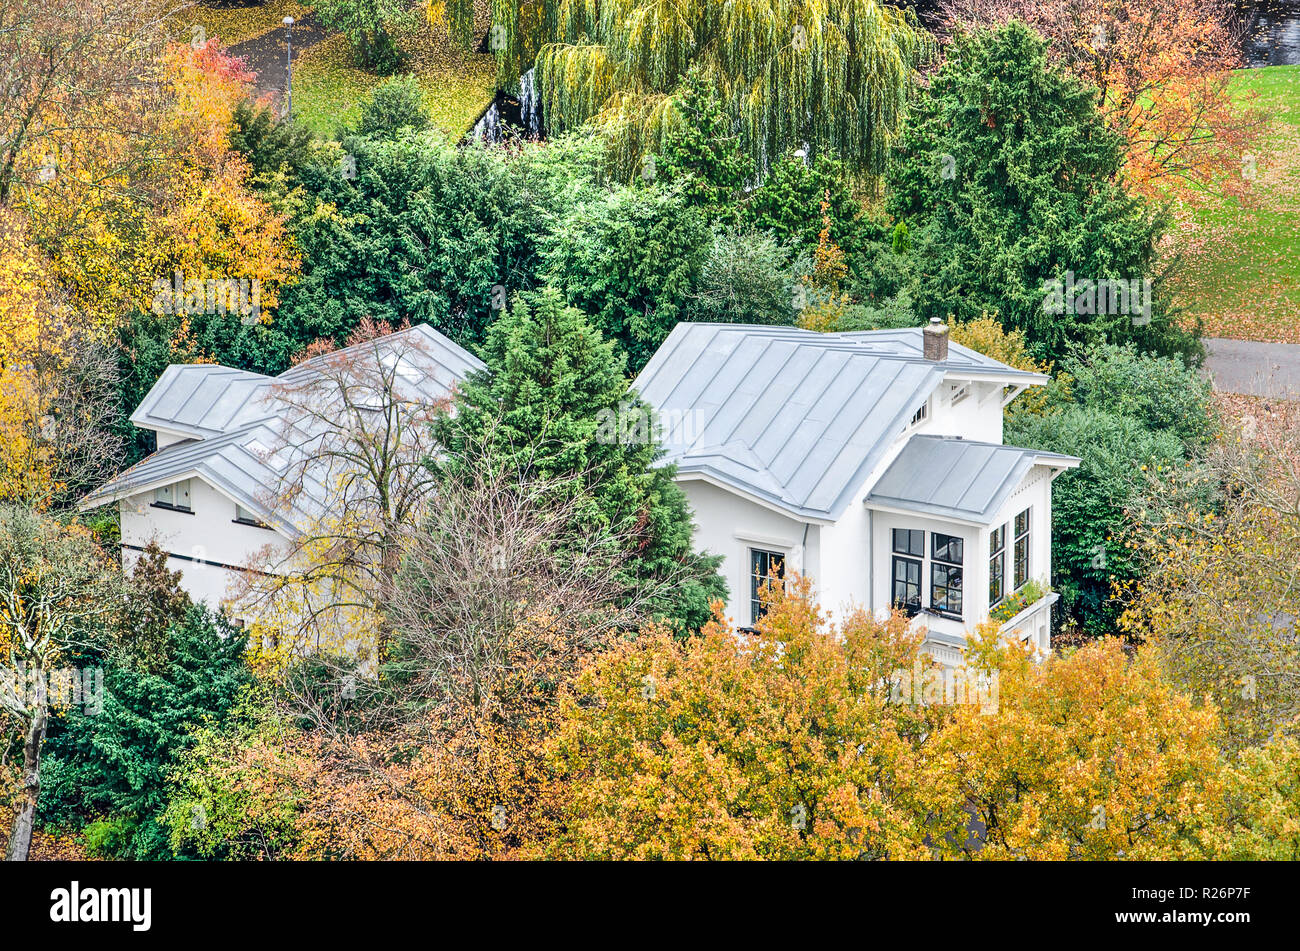 Rotterdam, The Netherlands, November 12, 2018: aerial view of the former coach-house in The Park, now in use as a cafe, surrounded by trees in autumn  Stock Photo